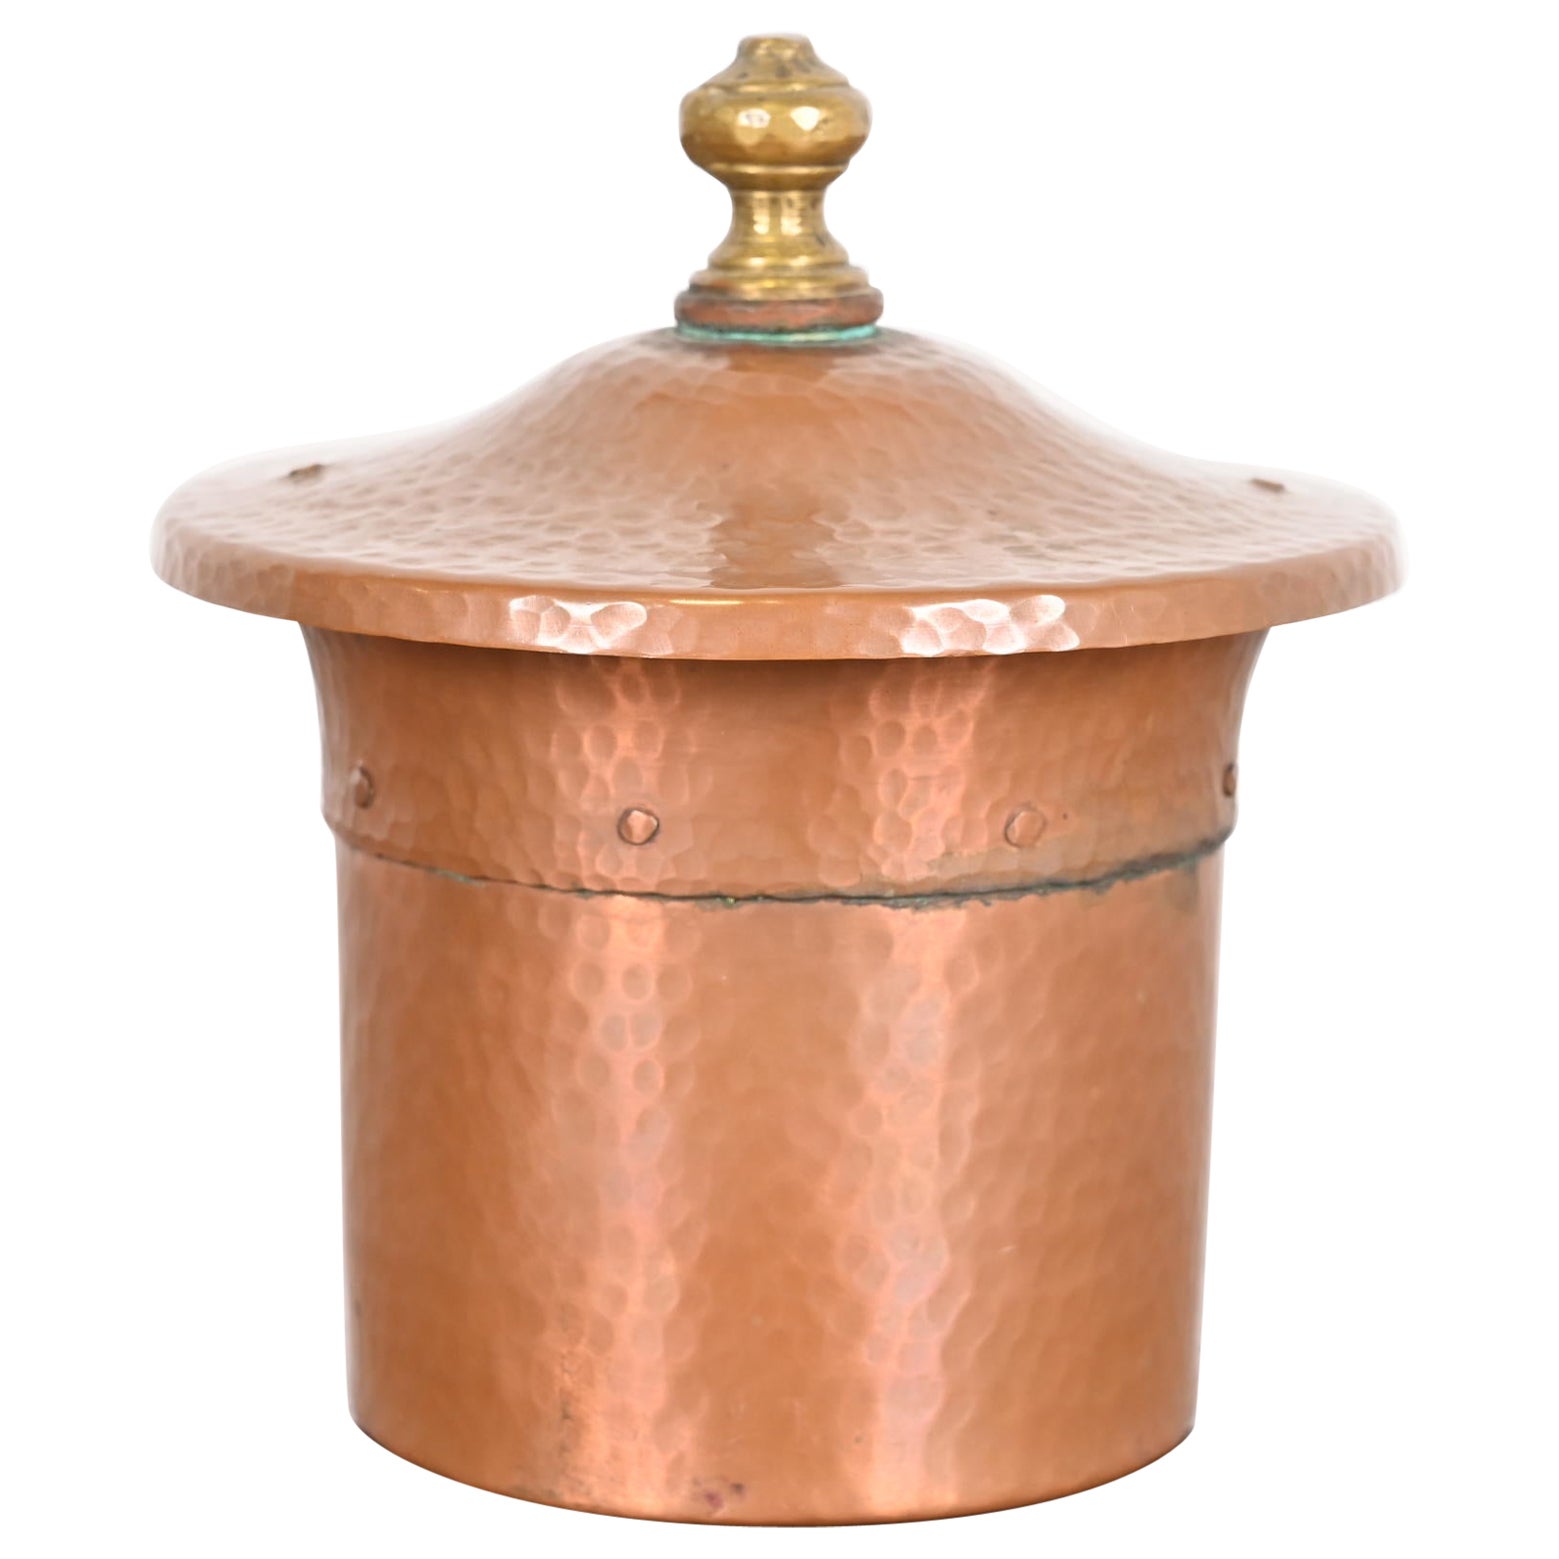 Benedict Studios Arts & Crafts Hammered Copper and Brass Humidor, Circa 1910 For Sale